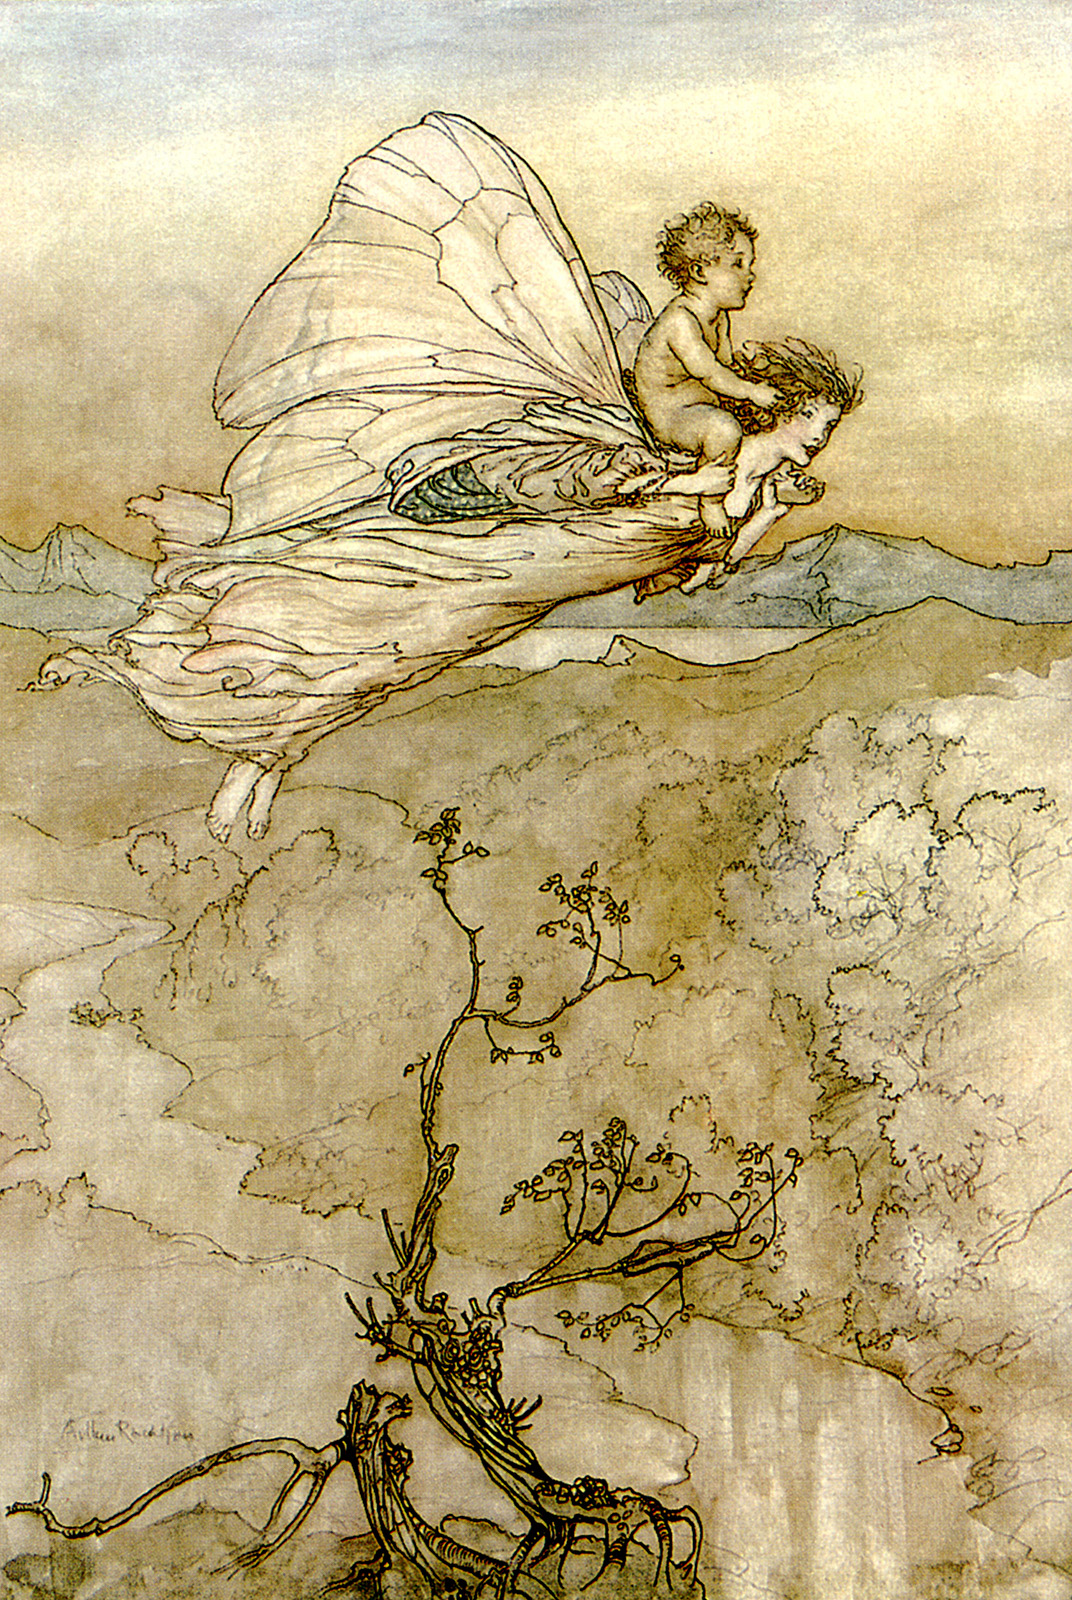 Fairy with Baby by Arthur Rackham - 1907 private collection